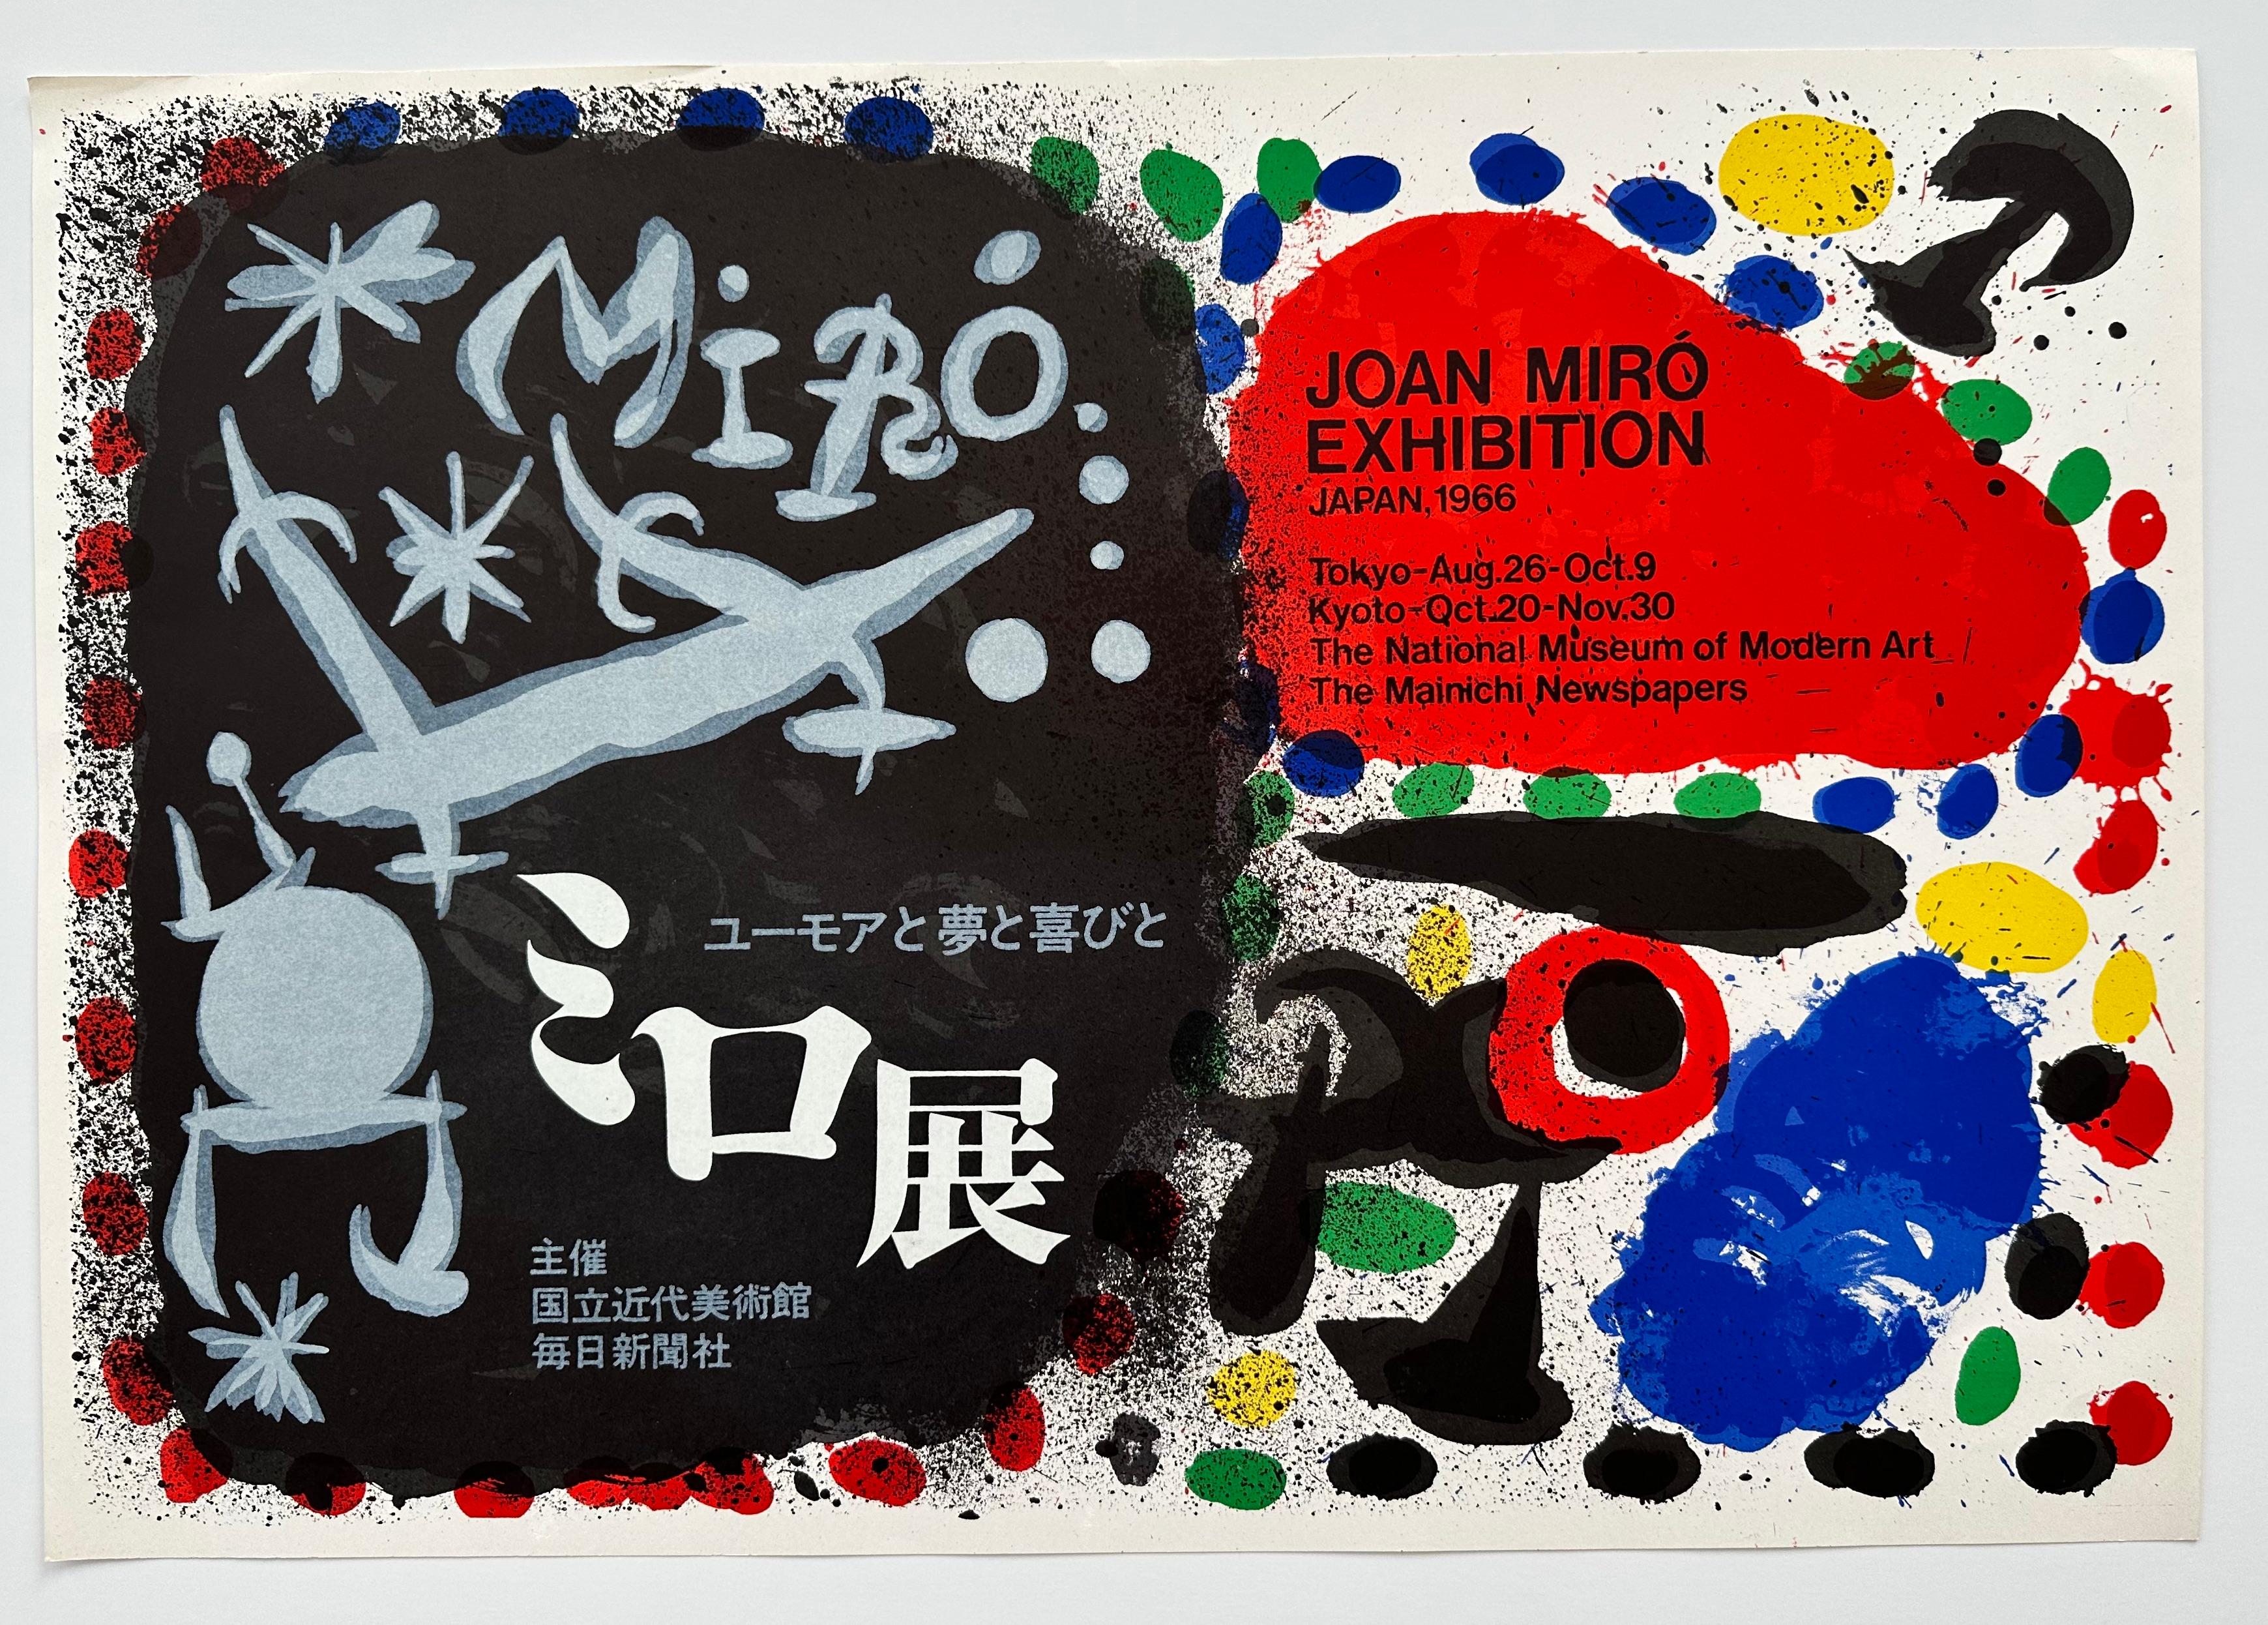 (after) Joan Miró Abstract Print - Japan 1966 Exhibition Poster Lithograph